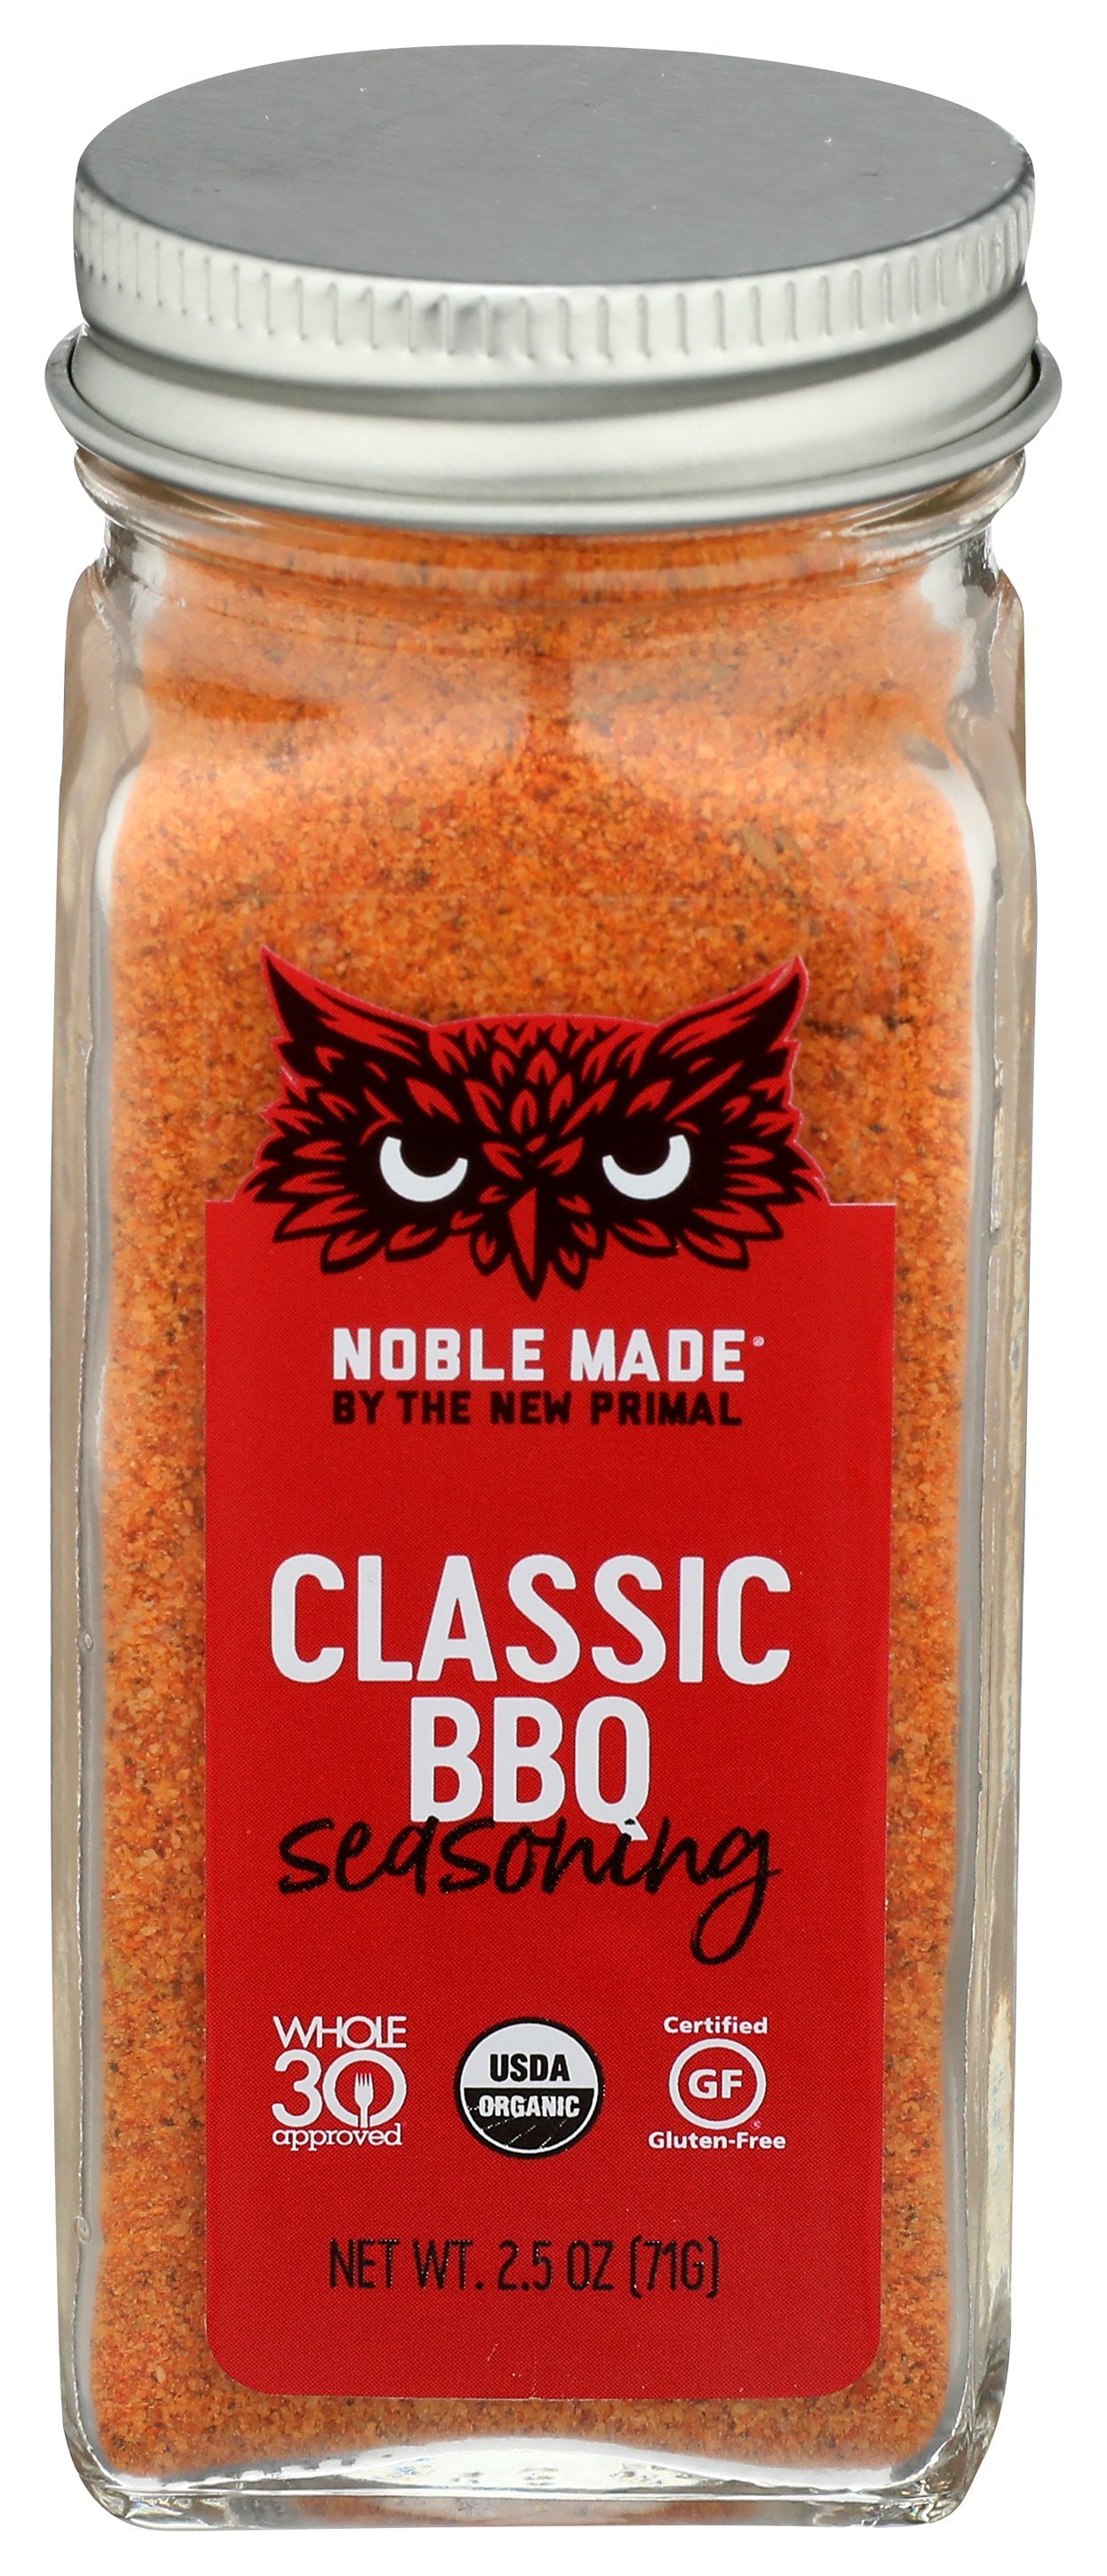 THE NEW PRIMAL SEASONIG NOBLE MADE  BBQ - Case of 6